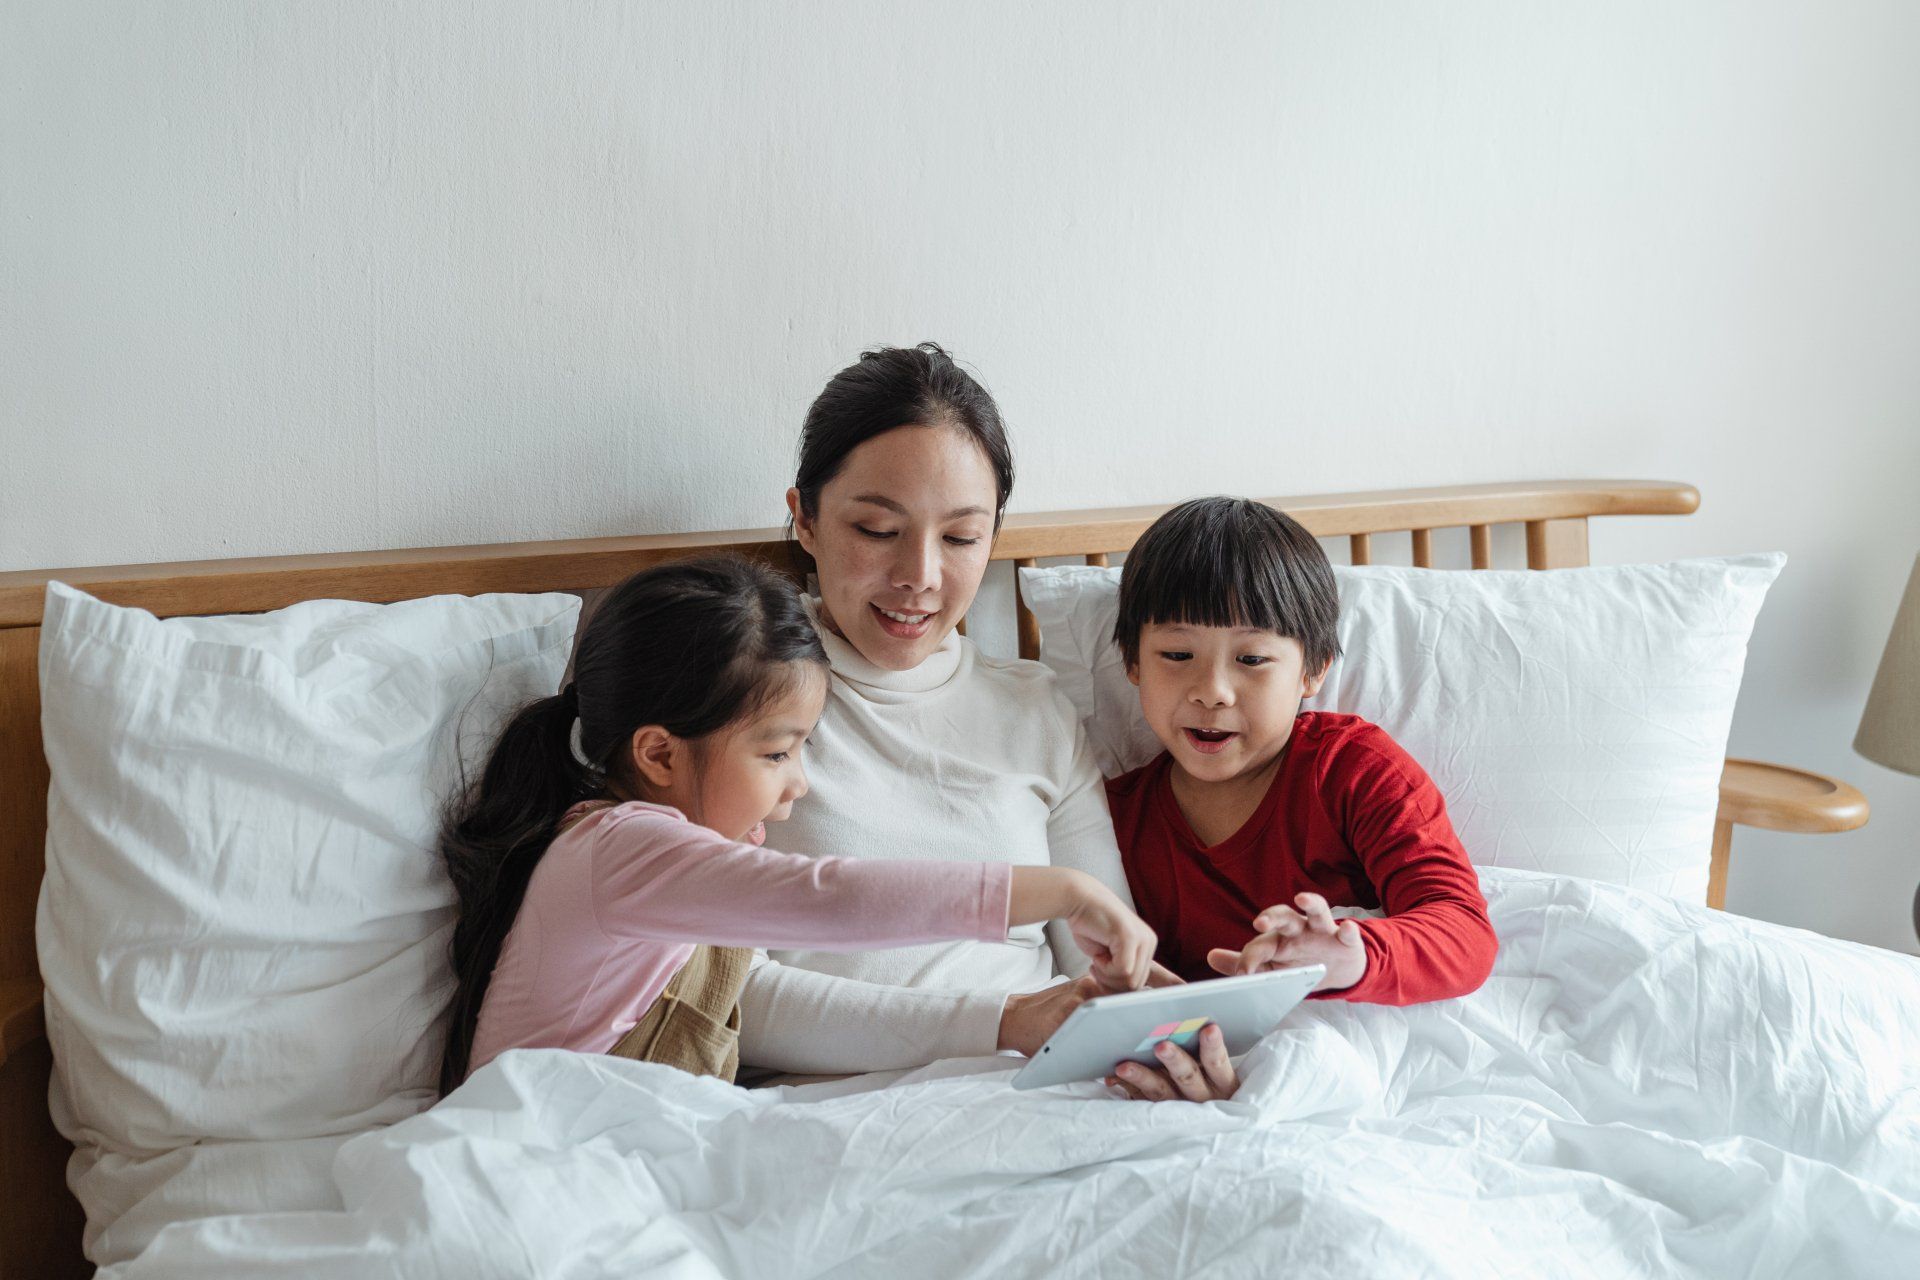 Mother and two young children cuddled up using a touchscreen media device together